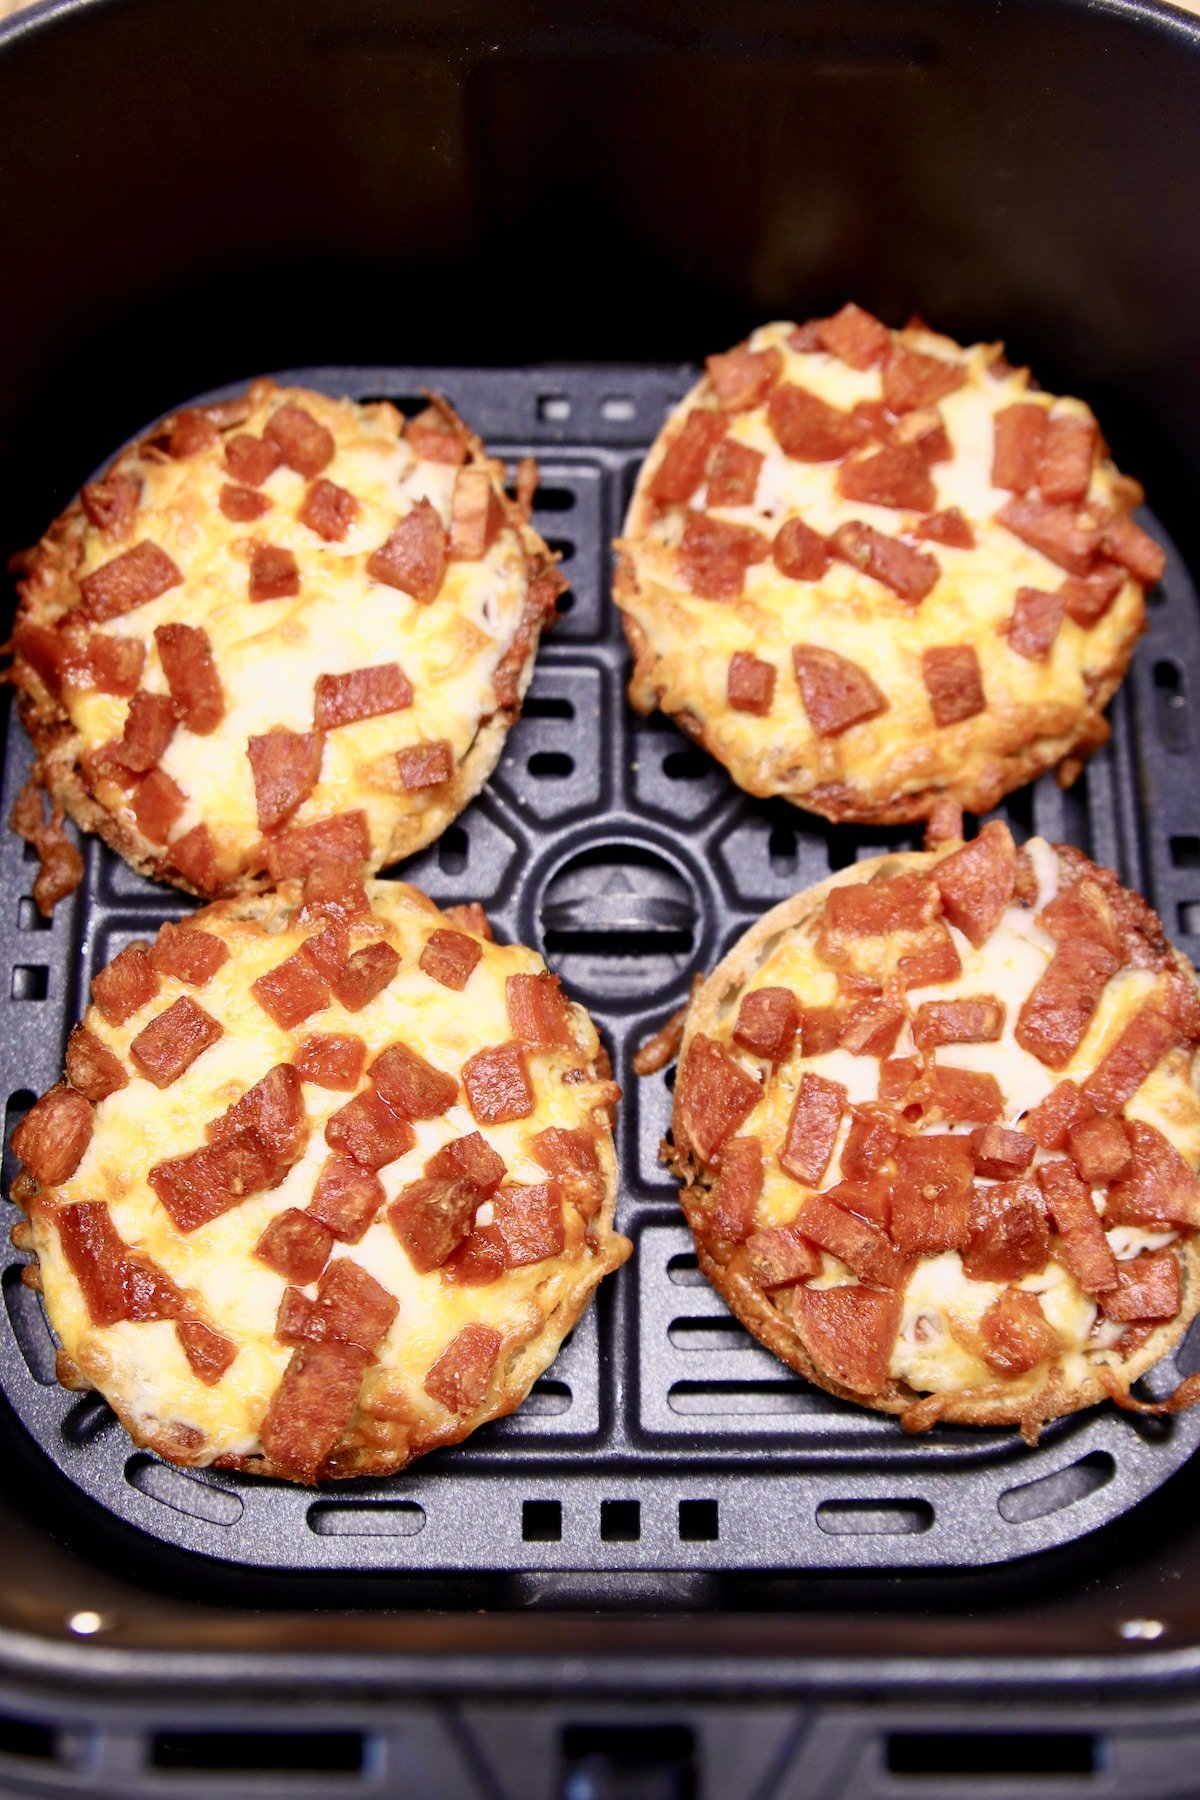 Air fryer with 4 mini pizzas.